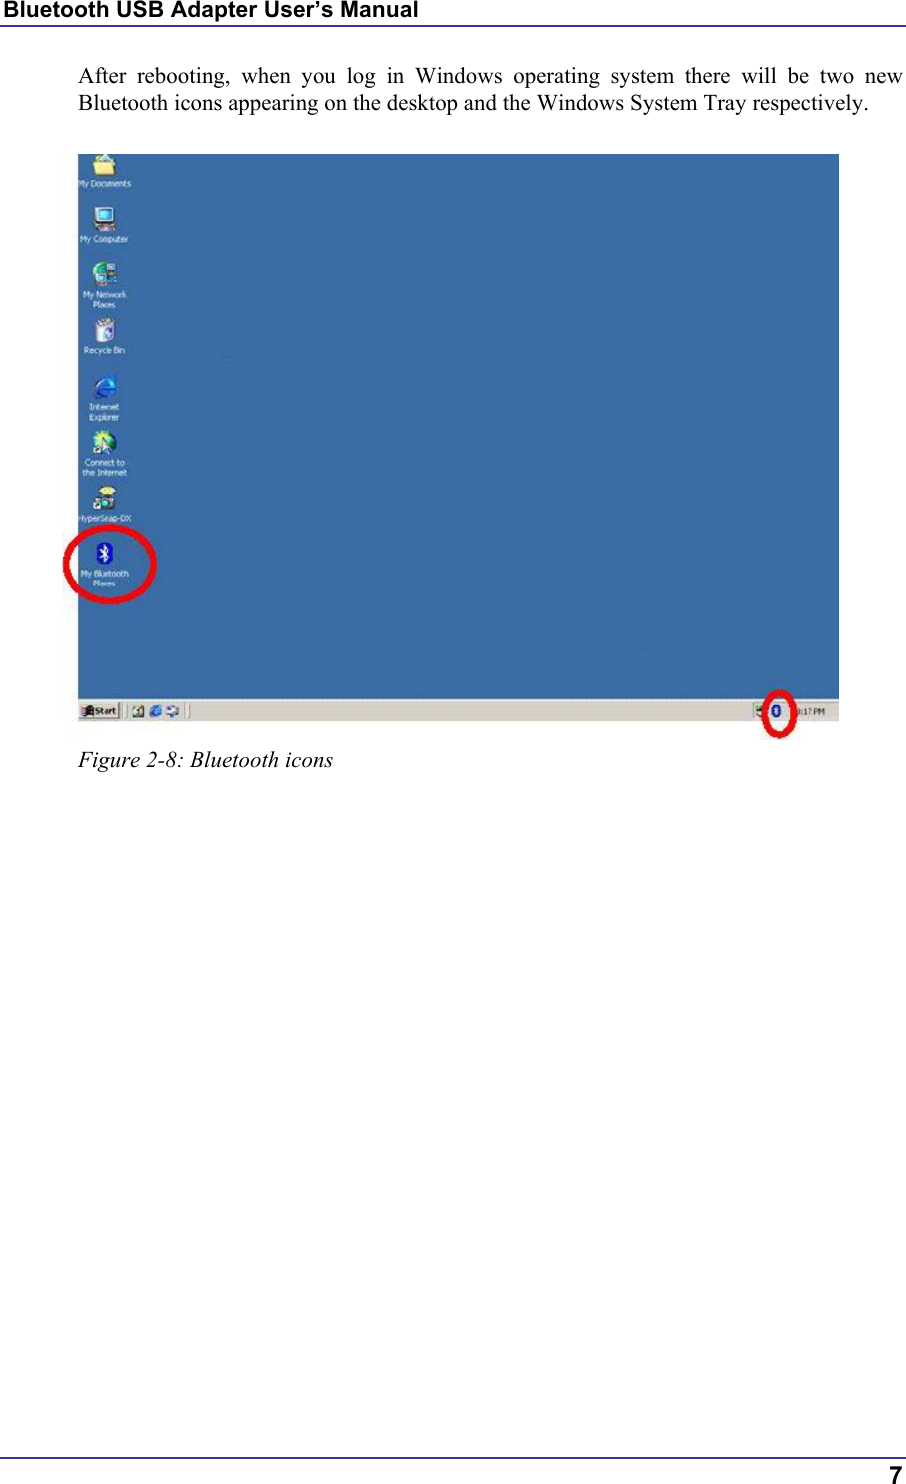 Bluetooth USB Adapter User’s Manual After rebooting, when you log in Windows operating system there will be two new Bluetooth icons appearing on the desktop and the Windows System Tray respectively.   Figure 2-8: Bluetooth icons    7 